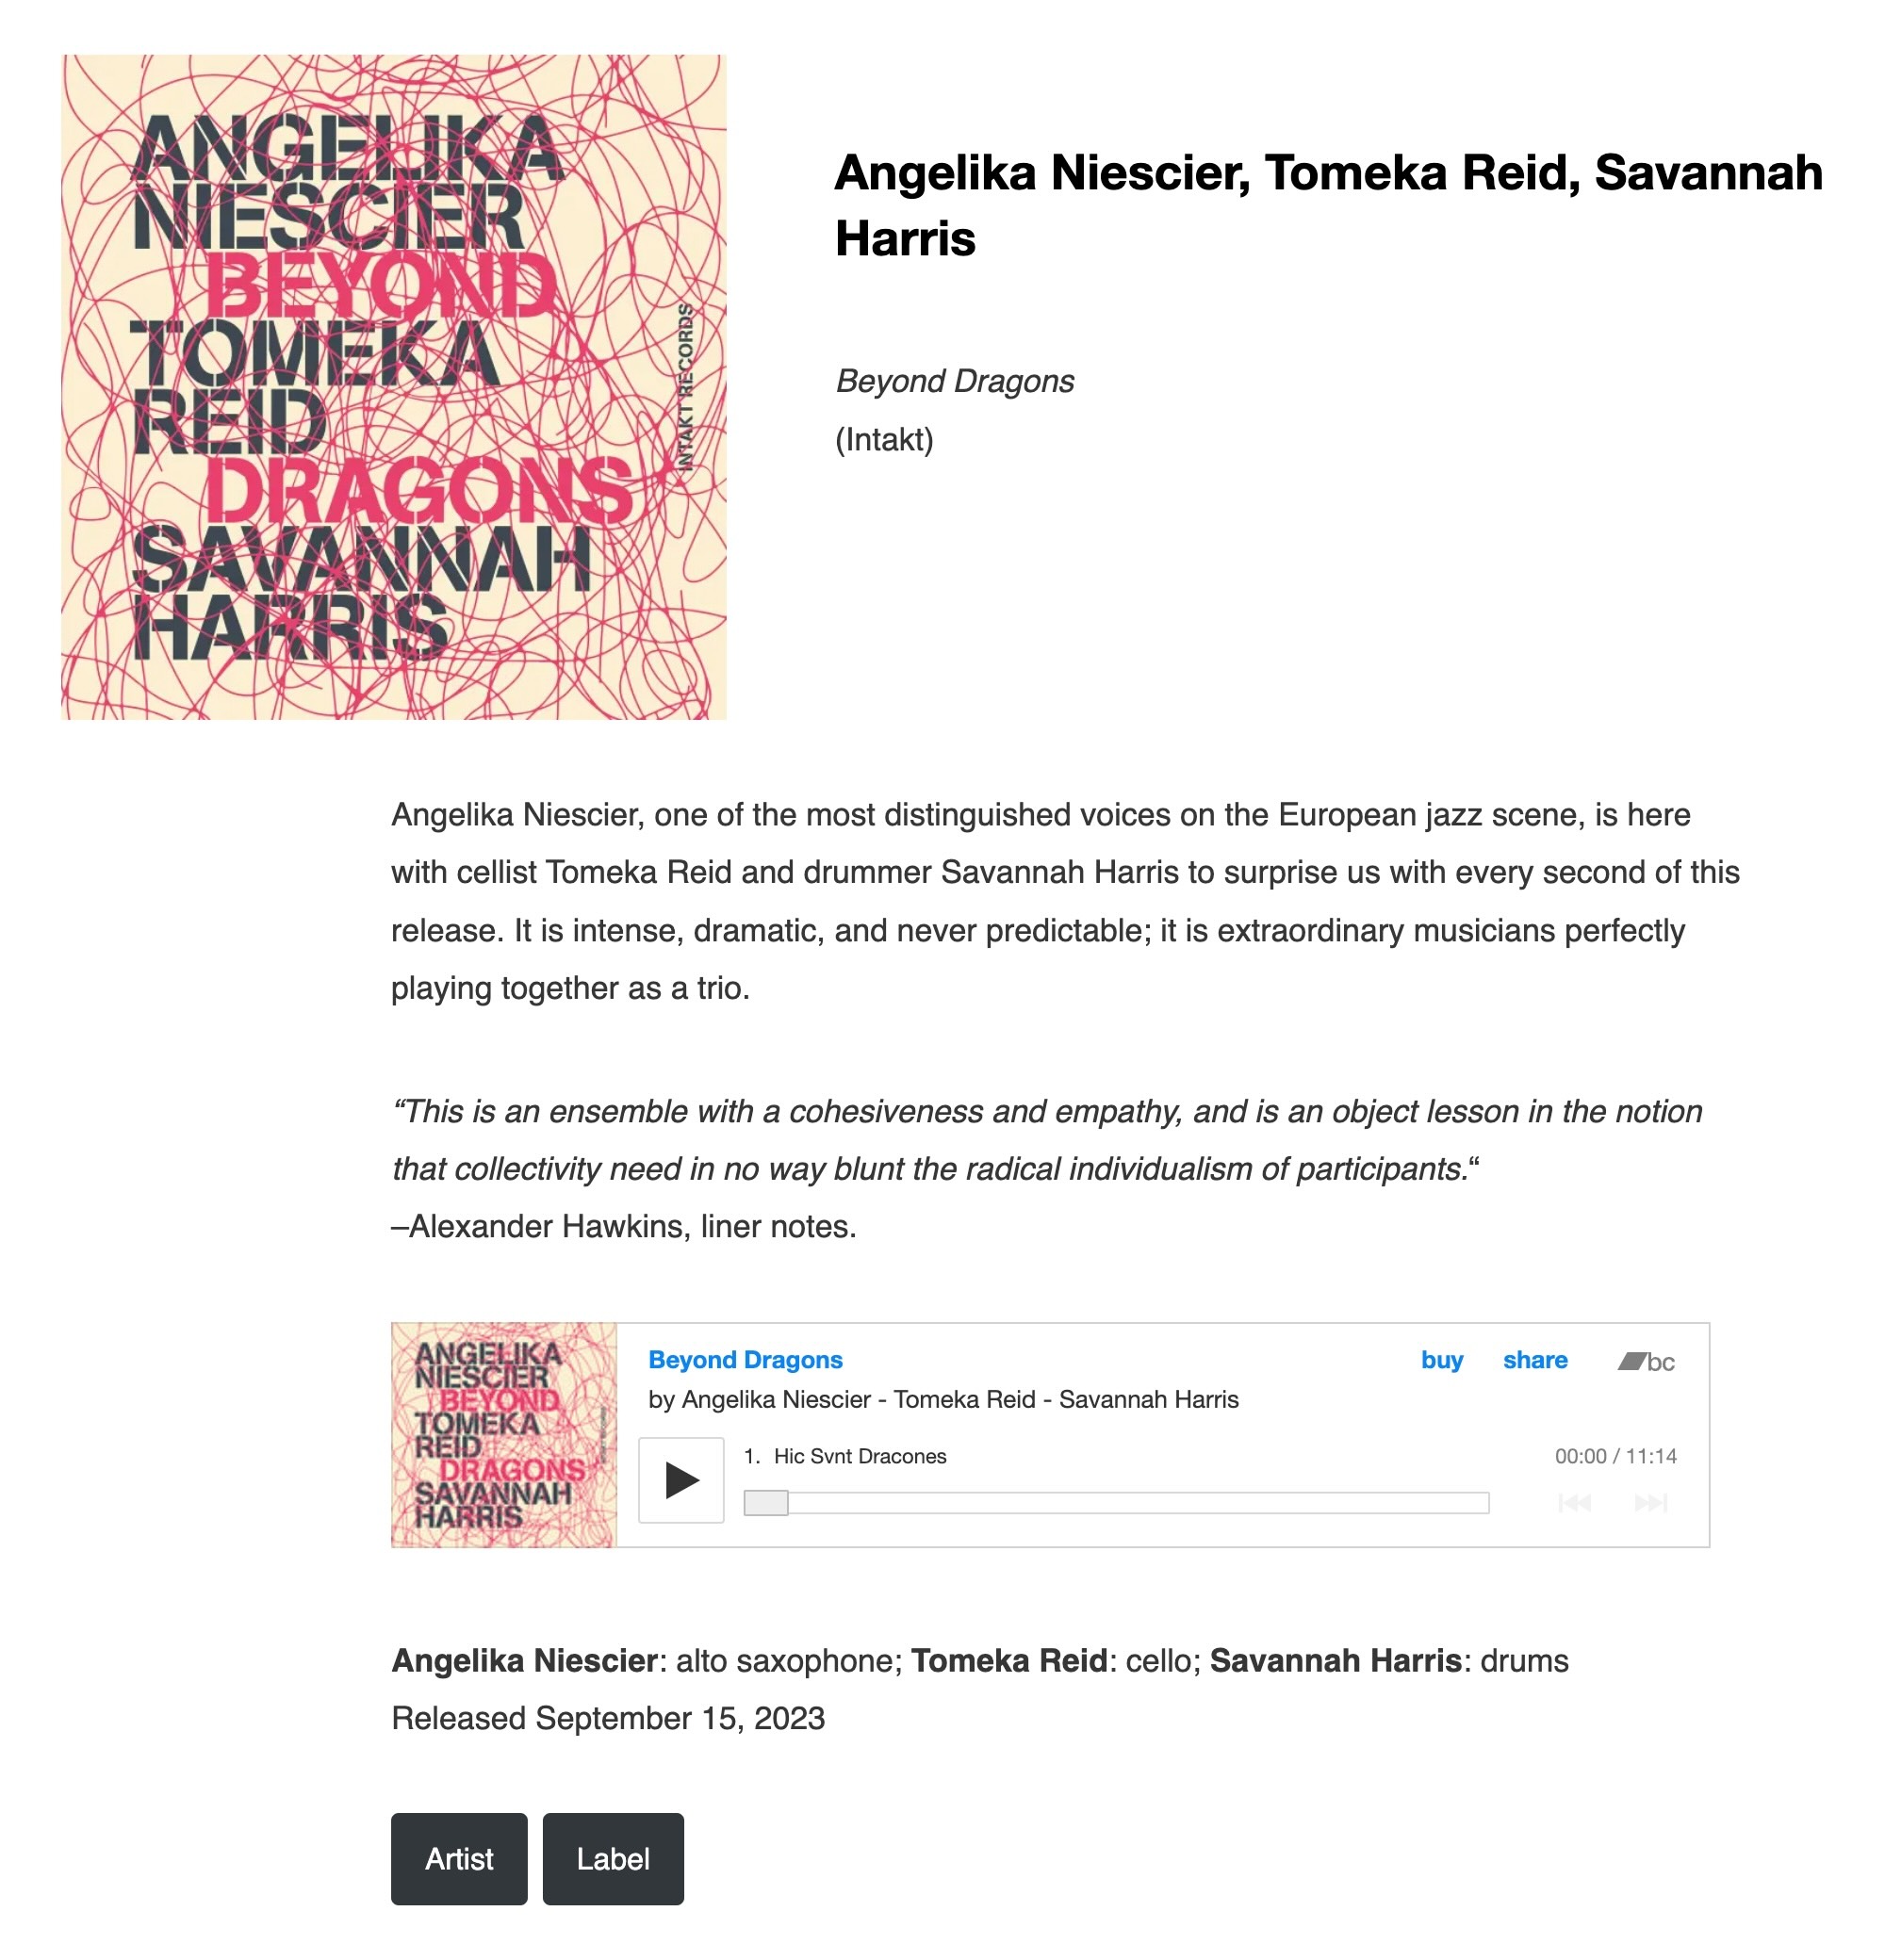 Angelika Niescier, one of the most distinguished voices on the European jazz scene, is here with cellist Tomeka Reid and drummer Savannah Harris to surprise us with every second of this release. It is intense, dramatic, and never predictable; it is extraordinary musicians perfectly playing together as a trio.